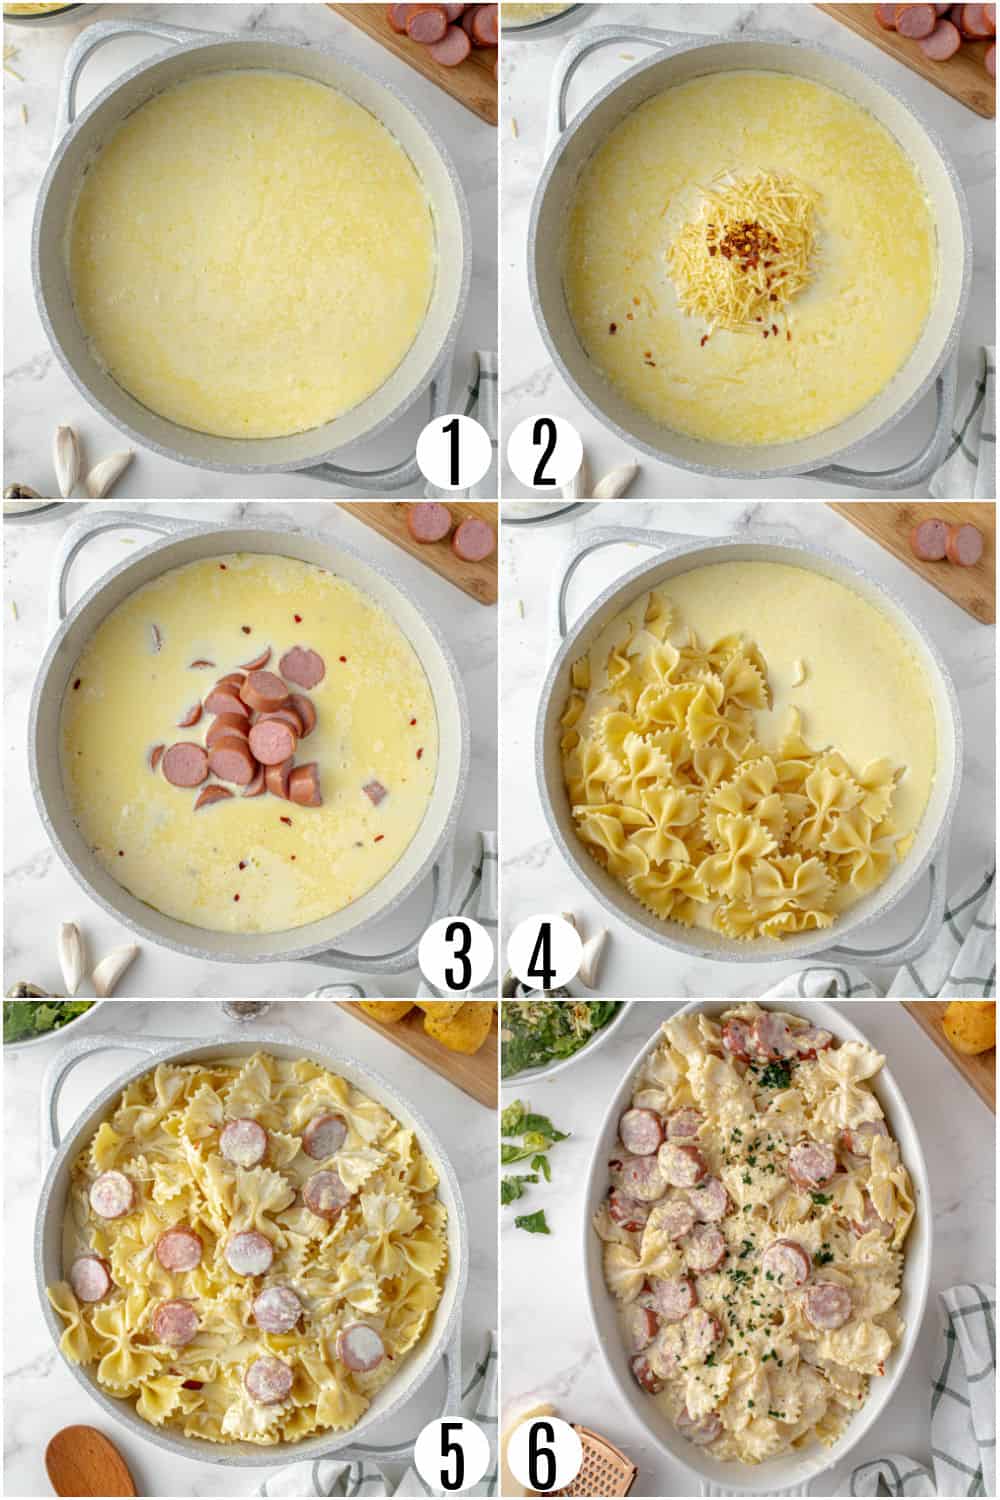 Step by step photos showing how to make sausage alfredo pasta.